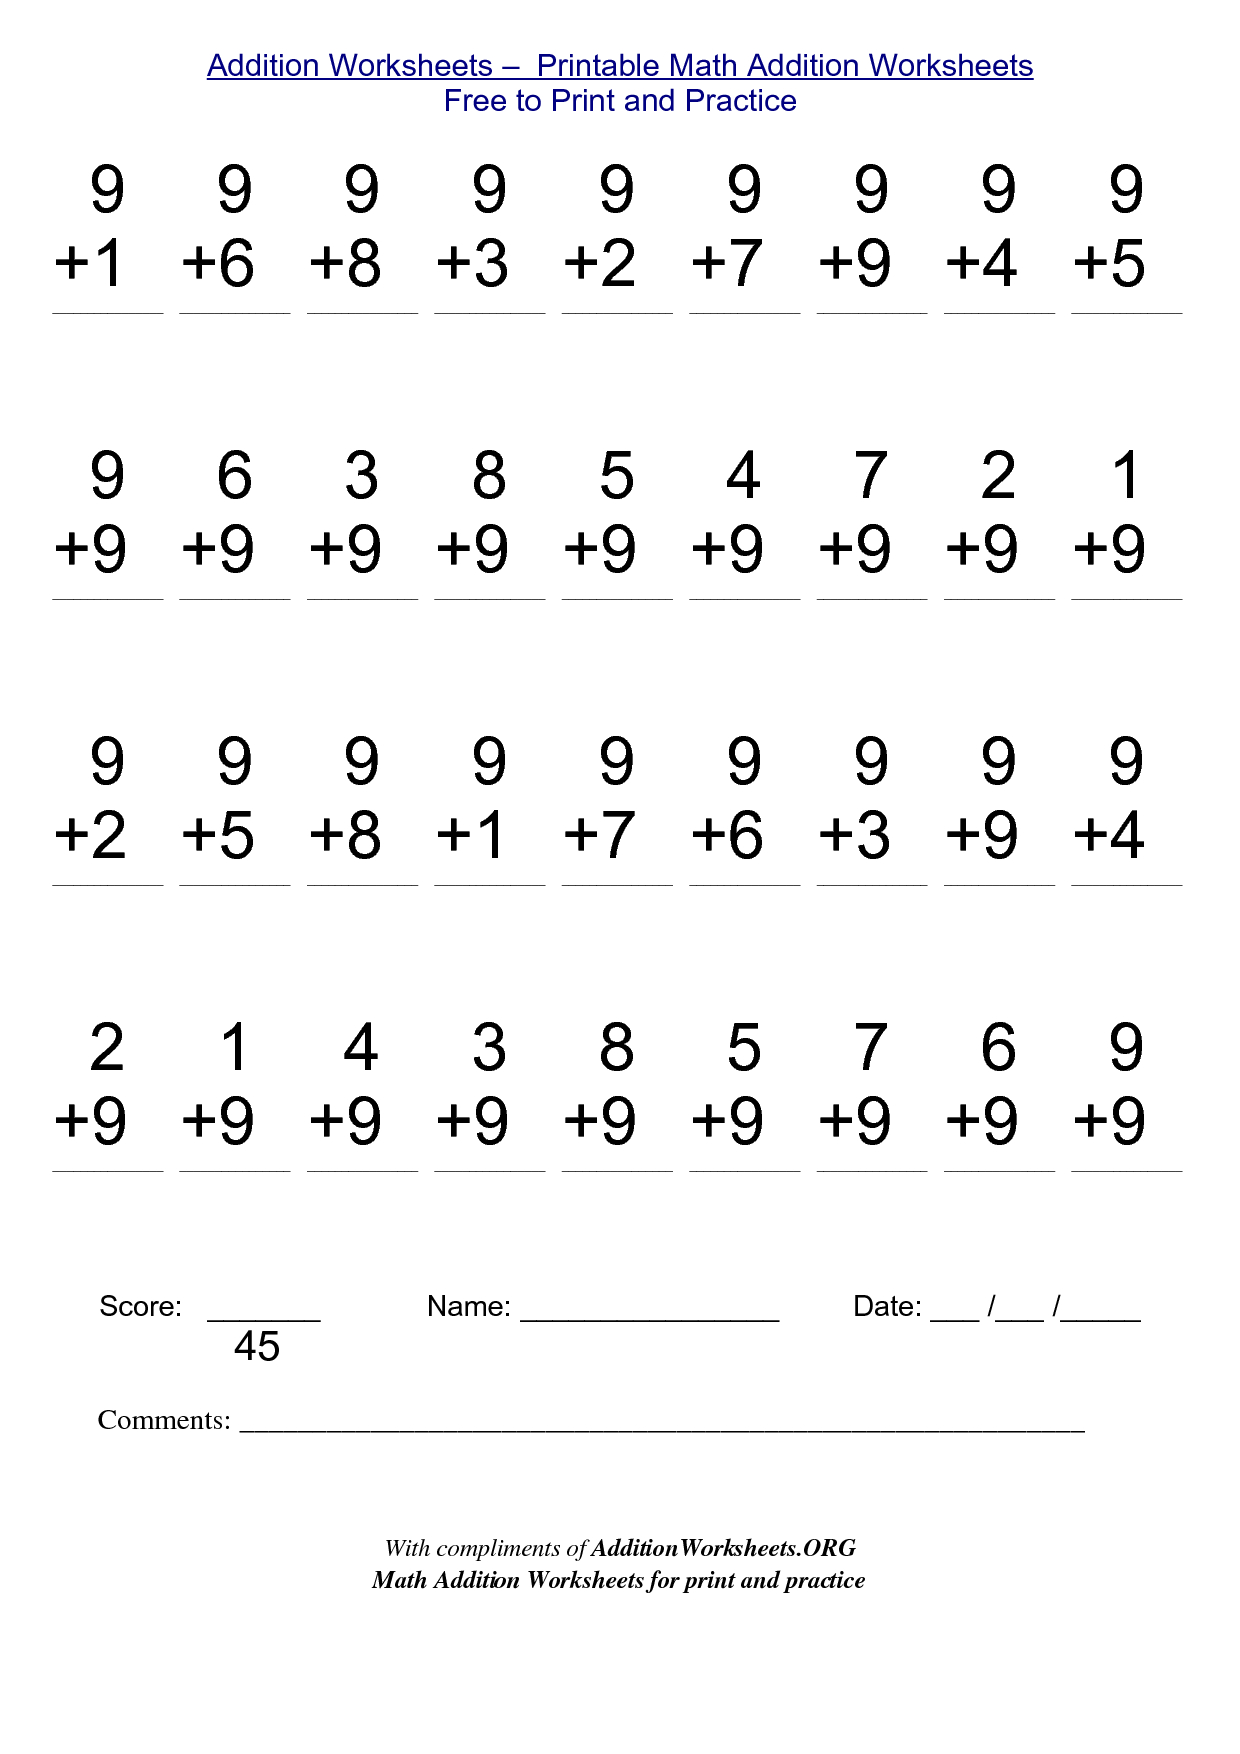 Math Worksheets For Free To Print - Alot | Me | Kindergarten | Free Printable Math Worksheets